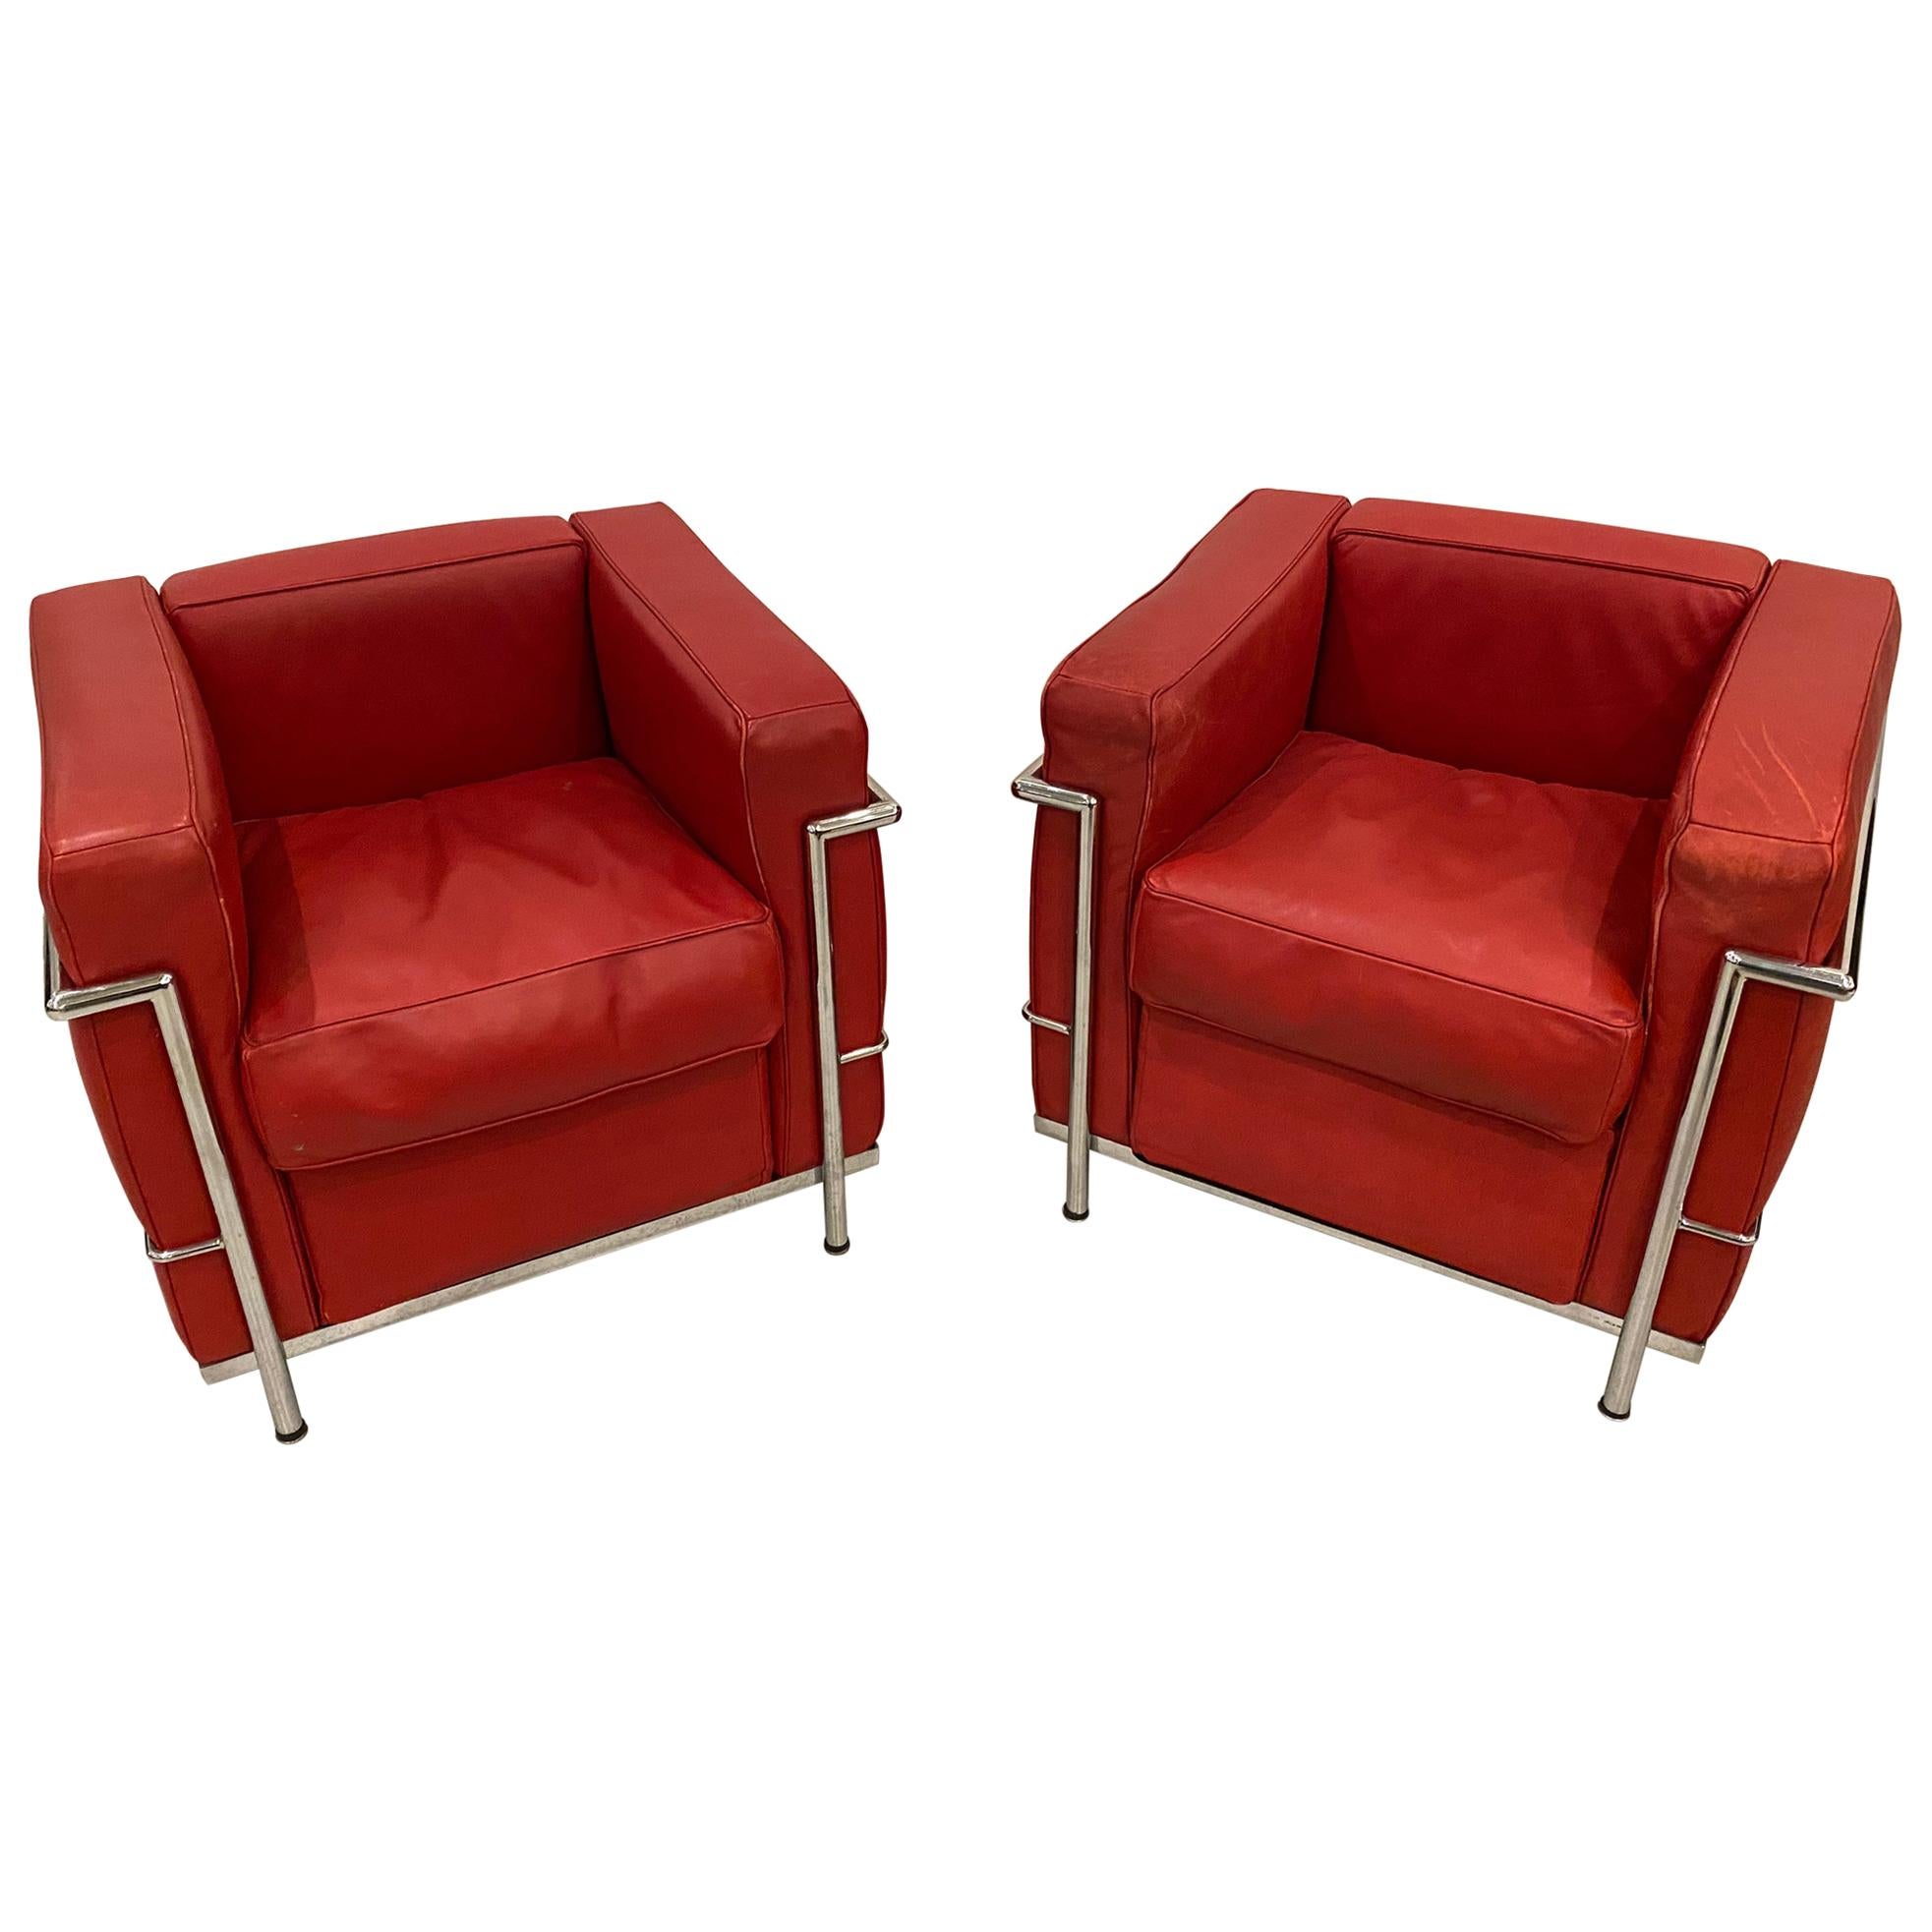 Pair of Chrome and Red Leather Club Chairs in the Style of Le Corbusier For Sale